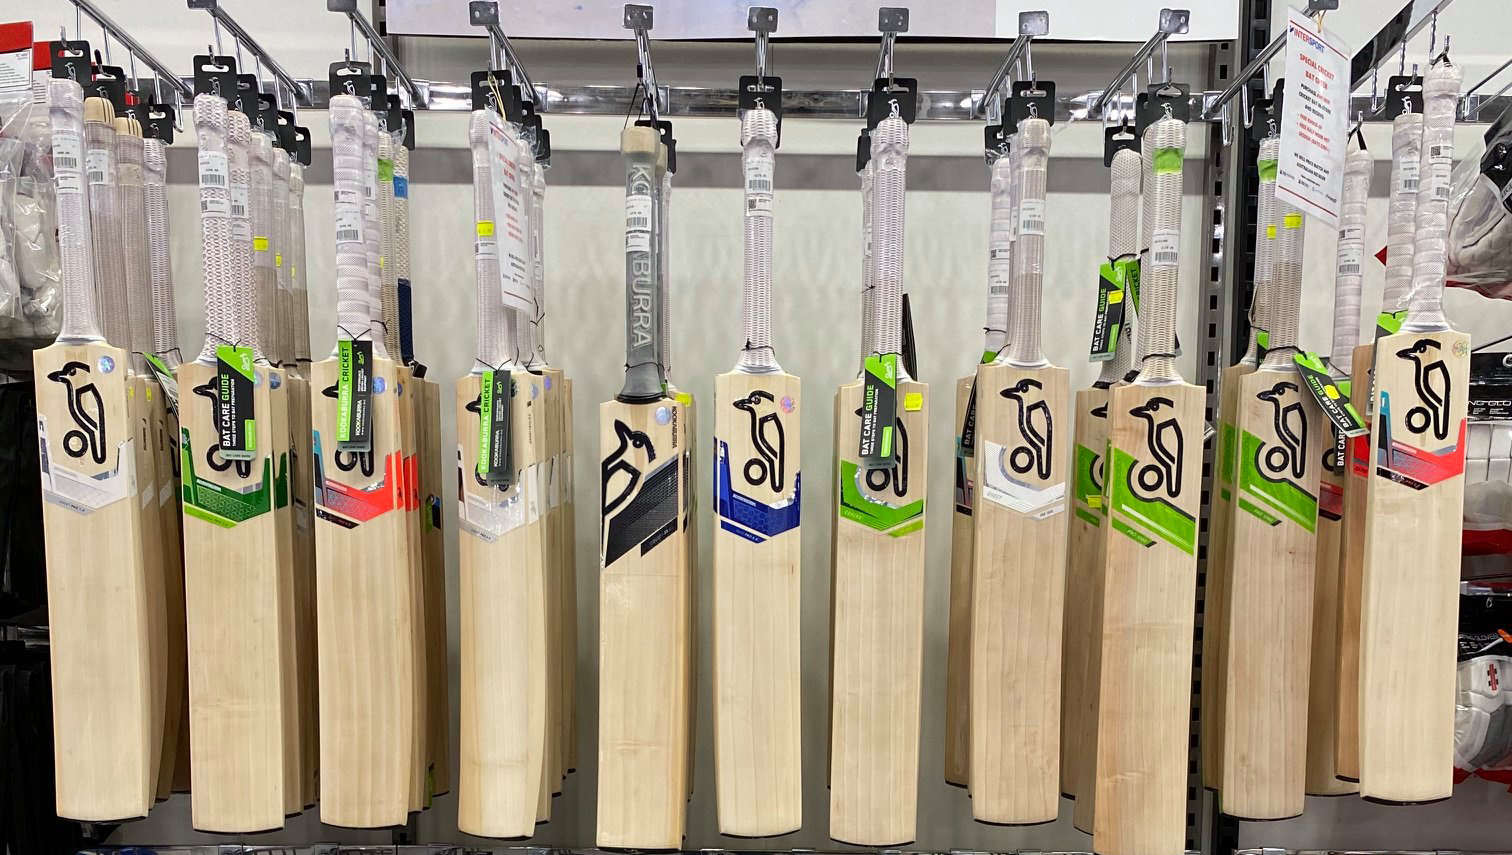 Minimum 5% OFF SneakQIK Exclusive offer on All Cricket gear (Including Sale items)